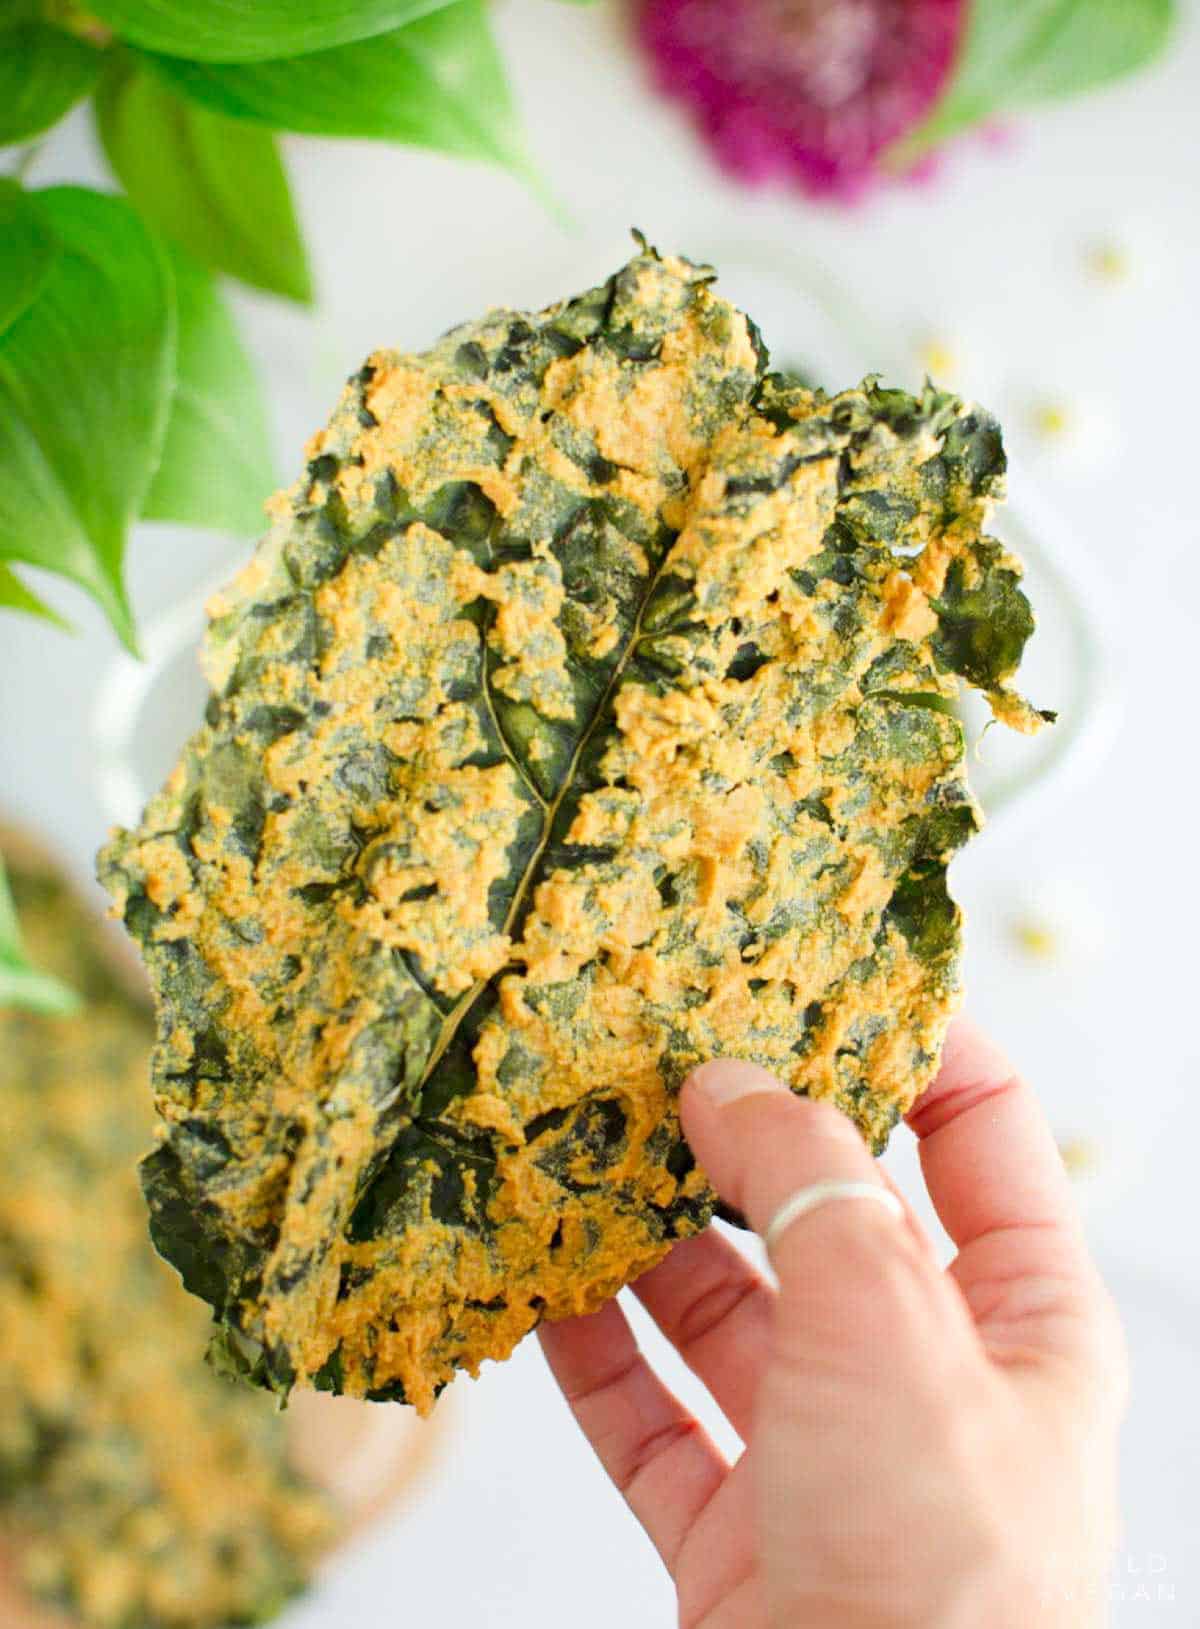 holding a large whole dino cheezy vegan dehydrated kale chip made in the excalibur dehydrator